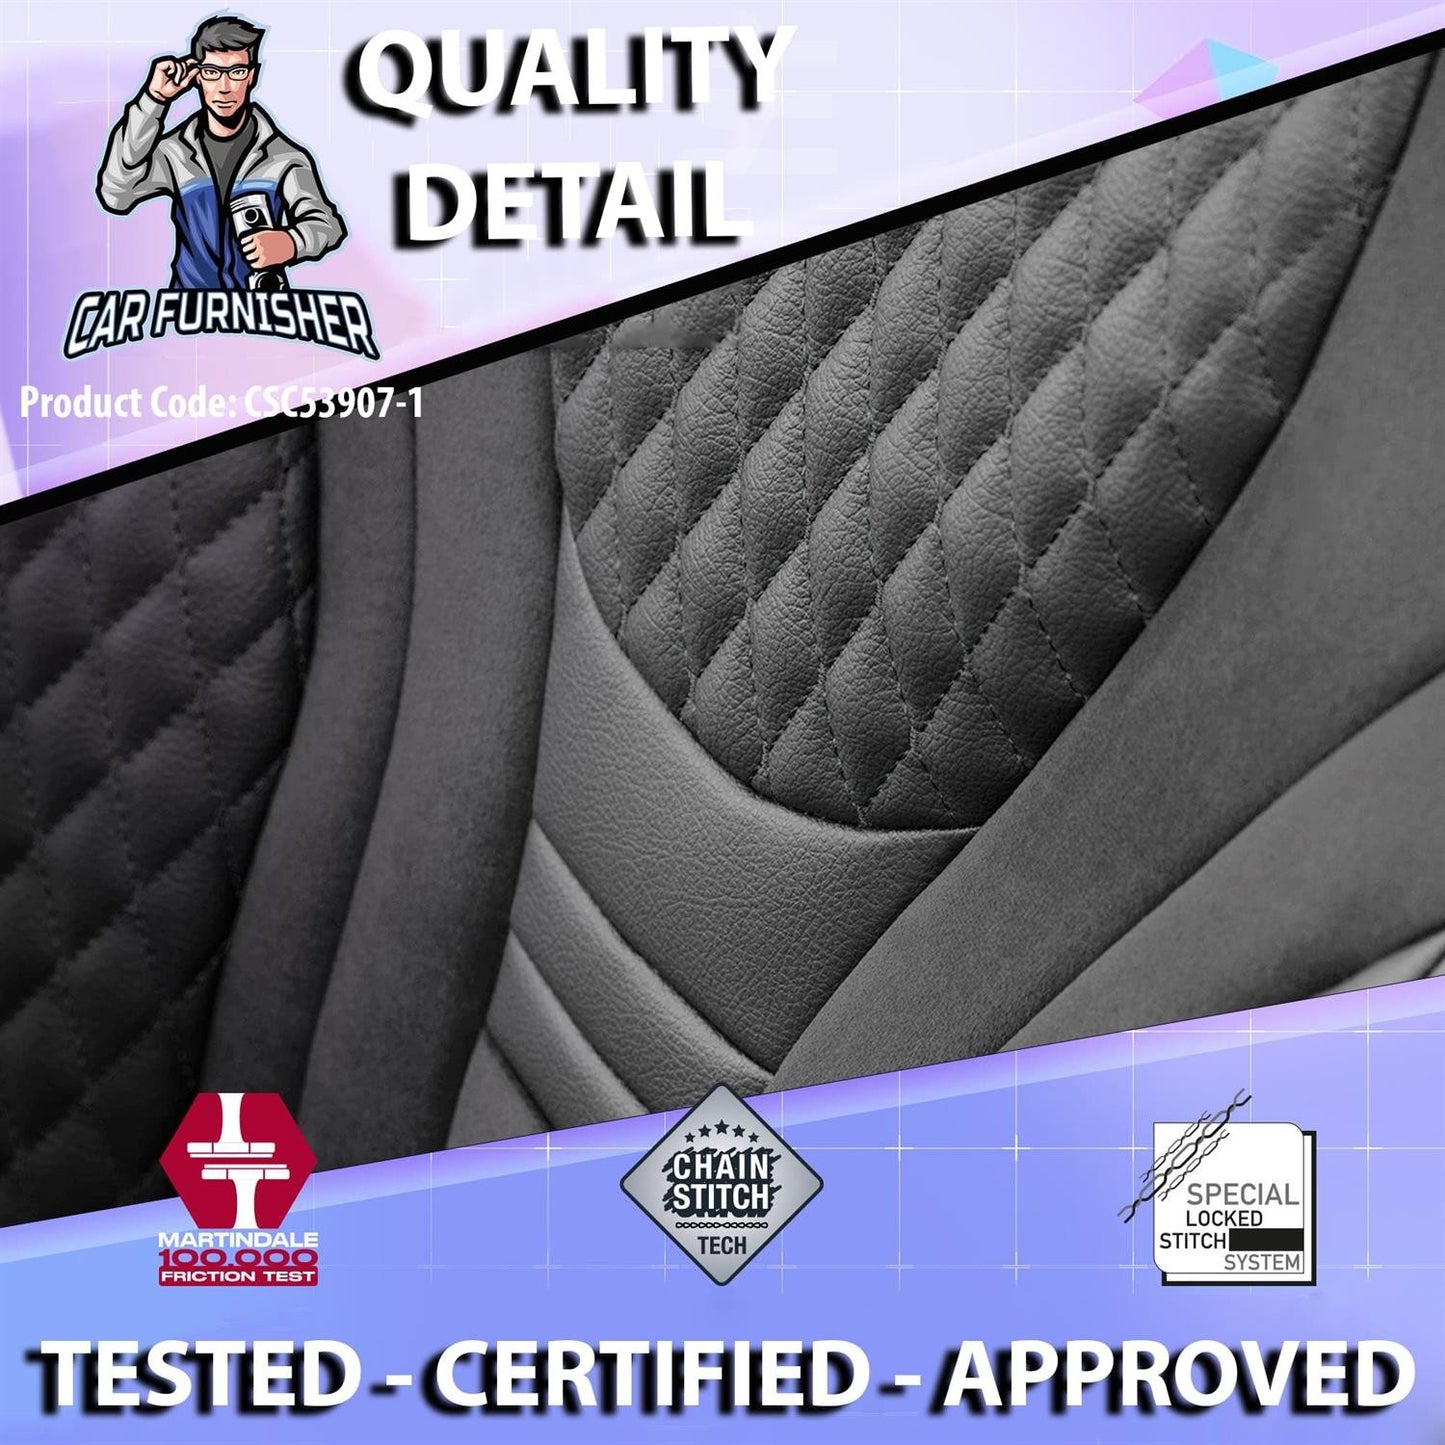 Luxury Car Seat Cover Set (3 Colors) | Infinity Series Black Leather & Fabric